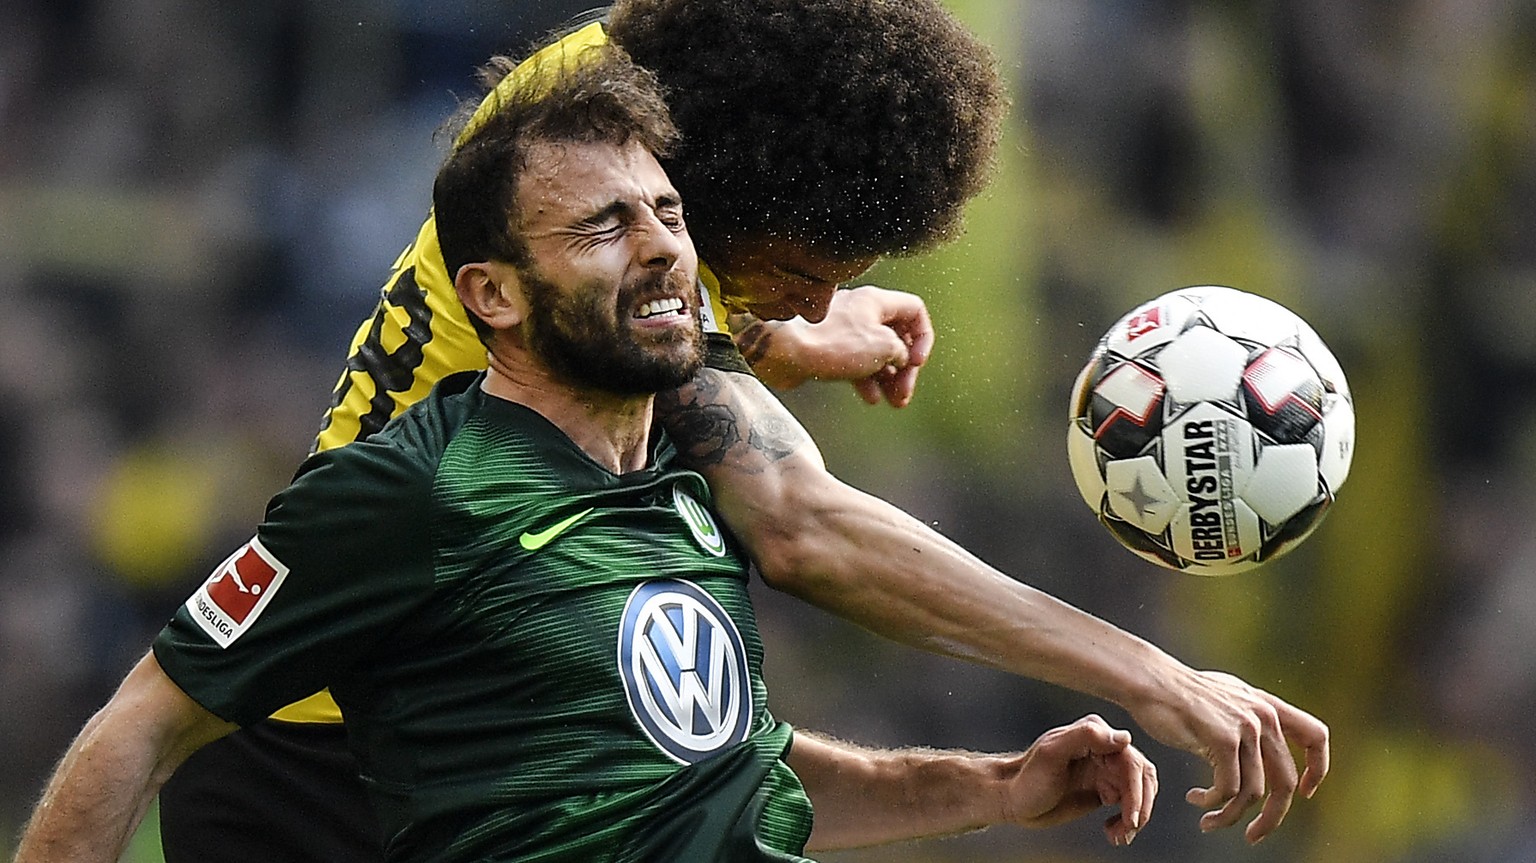 Wolfsburg&#039;s Admir Mehmedi, left, and Dortmund&#039;s Axel Witsel, right, challenge for the ball during the German Bundesliga soccer match between Borussia Dortmund and VfL Wolfsburg in Dortmund,  ...